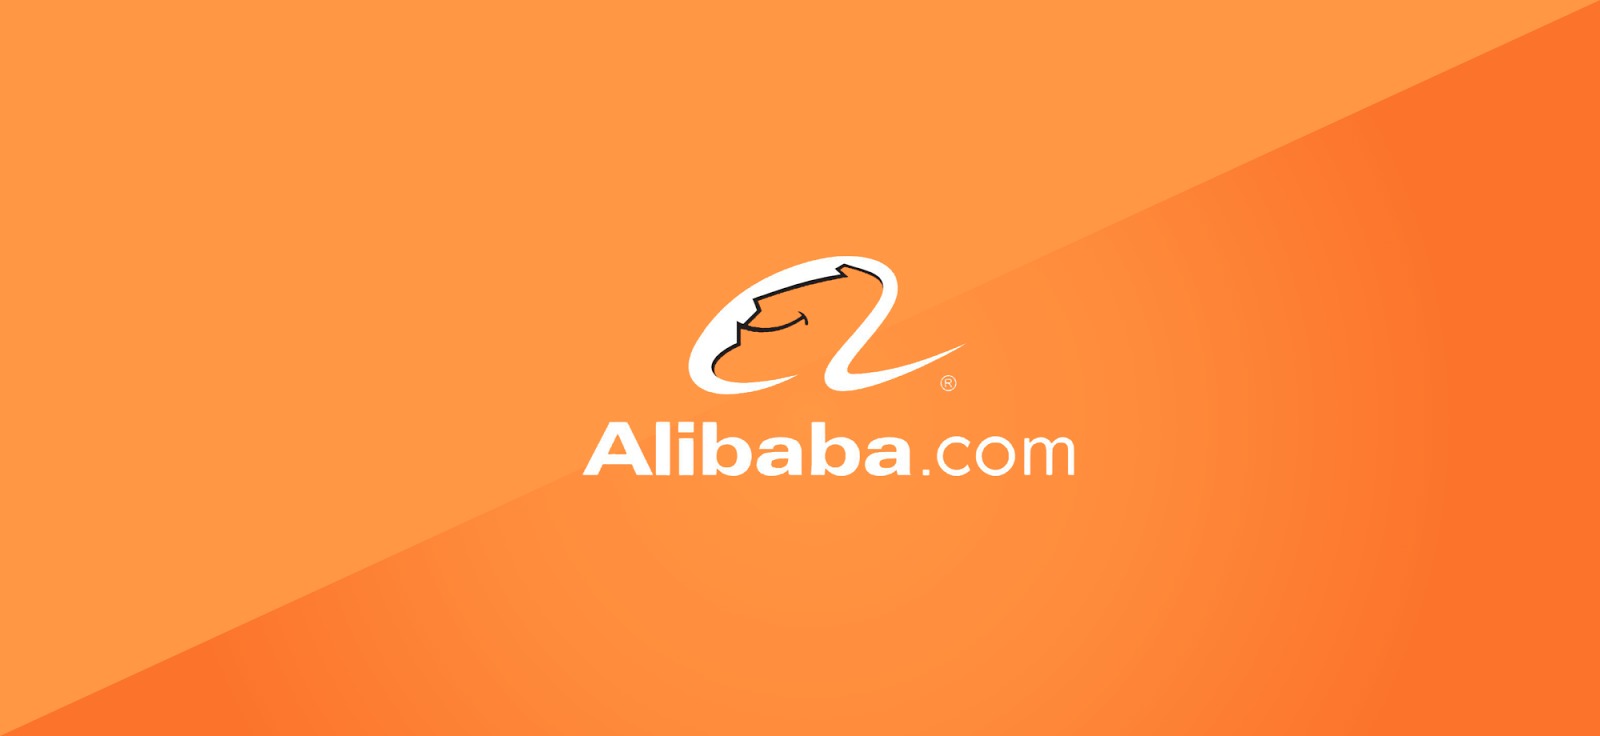 Alibaba has developed an AI model for its cloud service to compete with Amazon and Microsoft